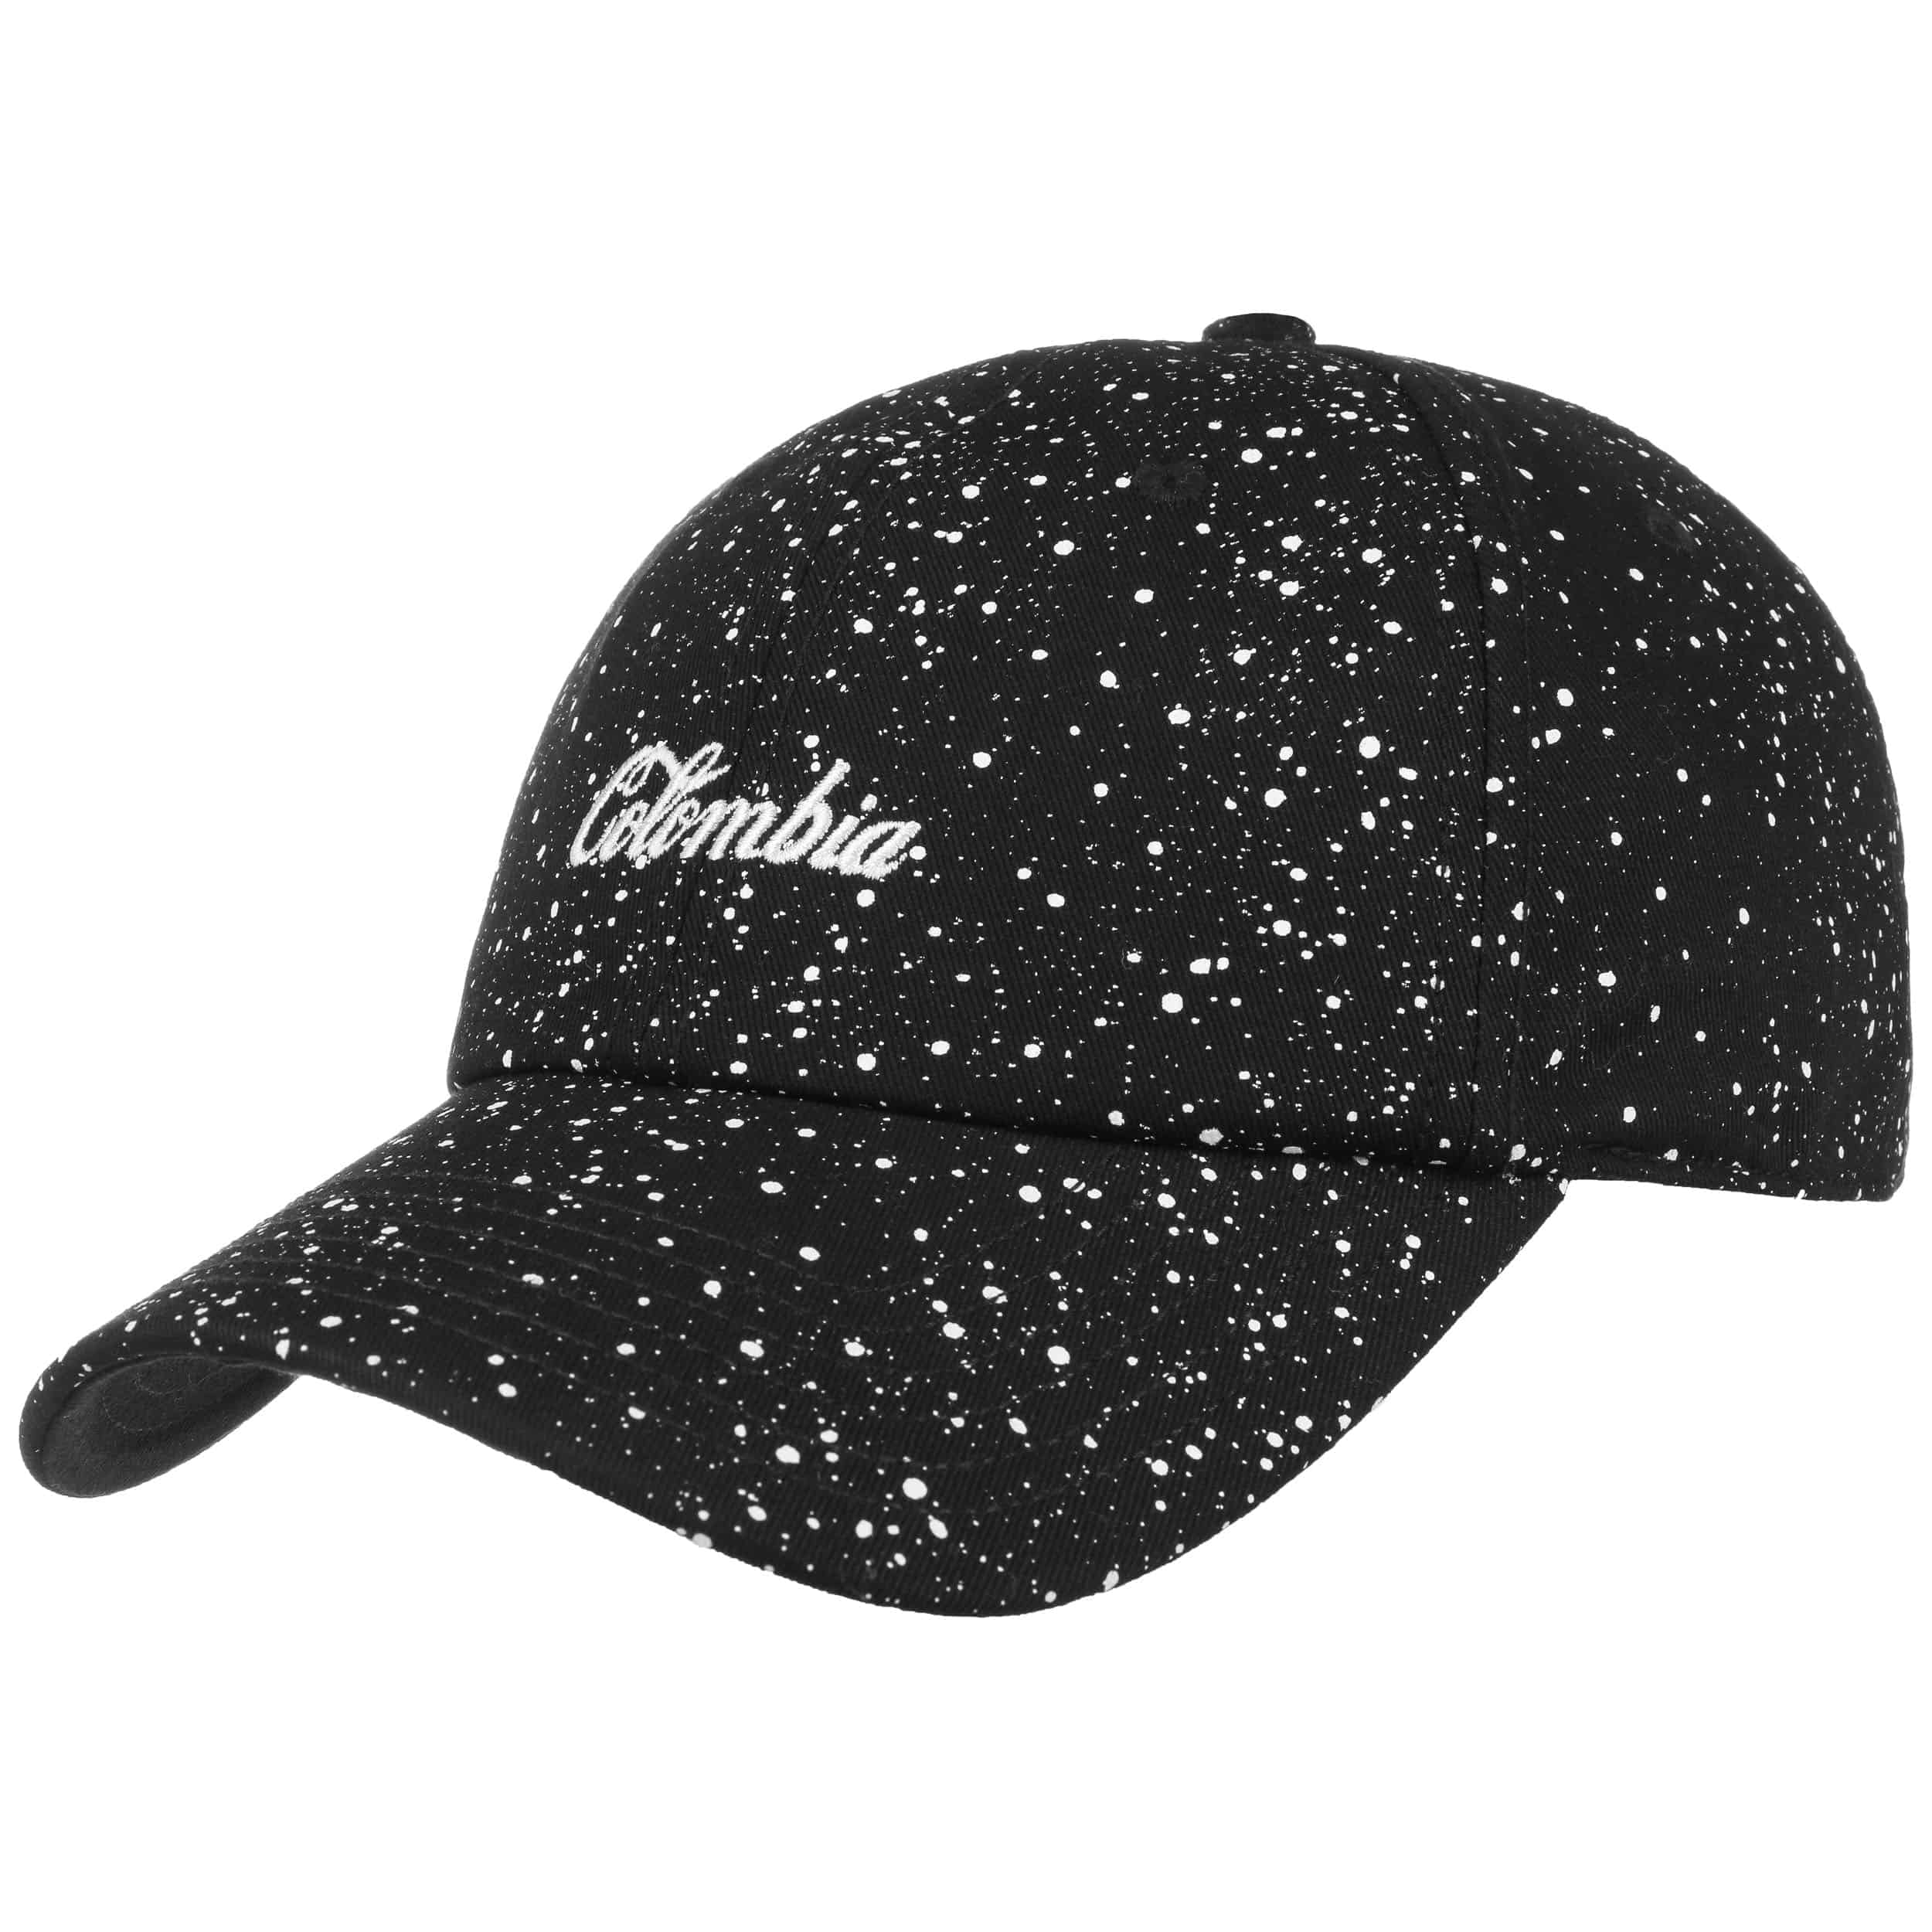 Colombia Curved Cap by Cayler & Sons - 29,95 €